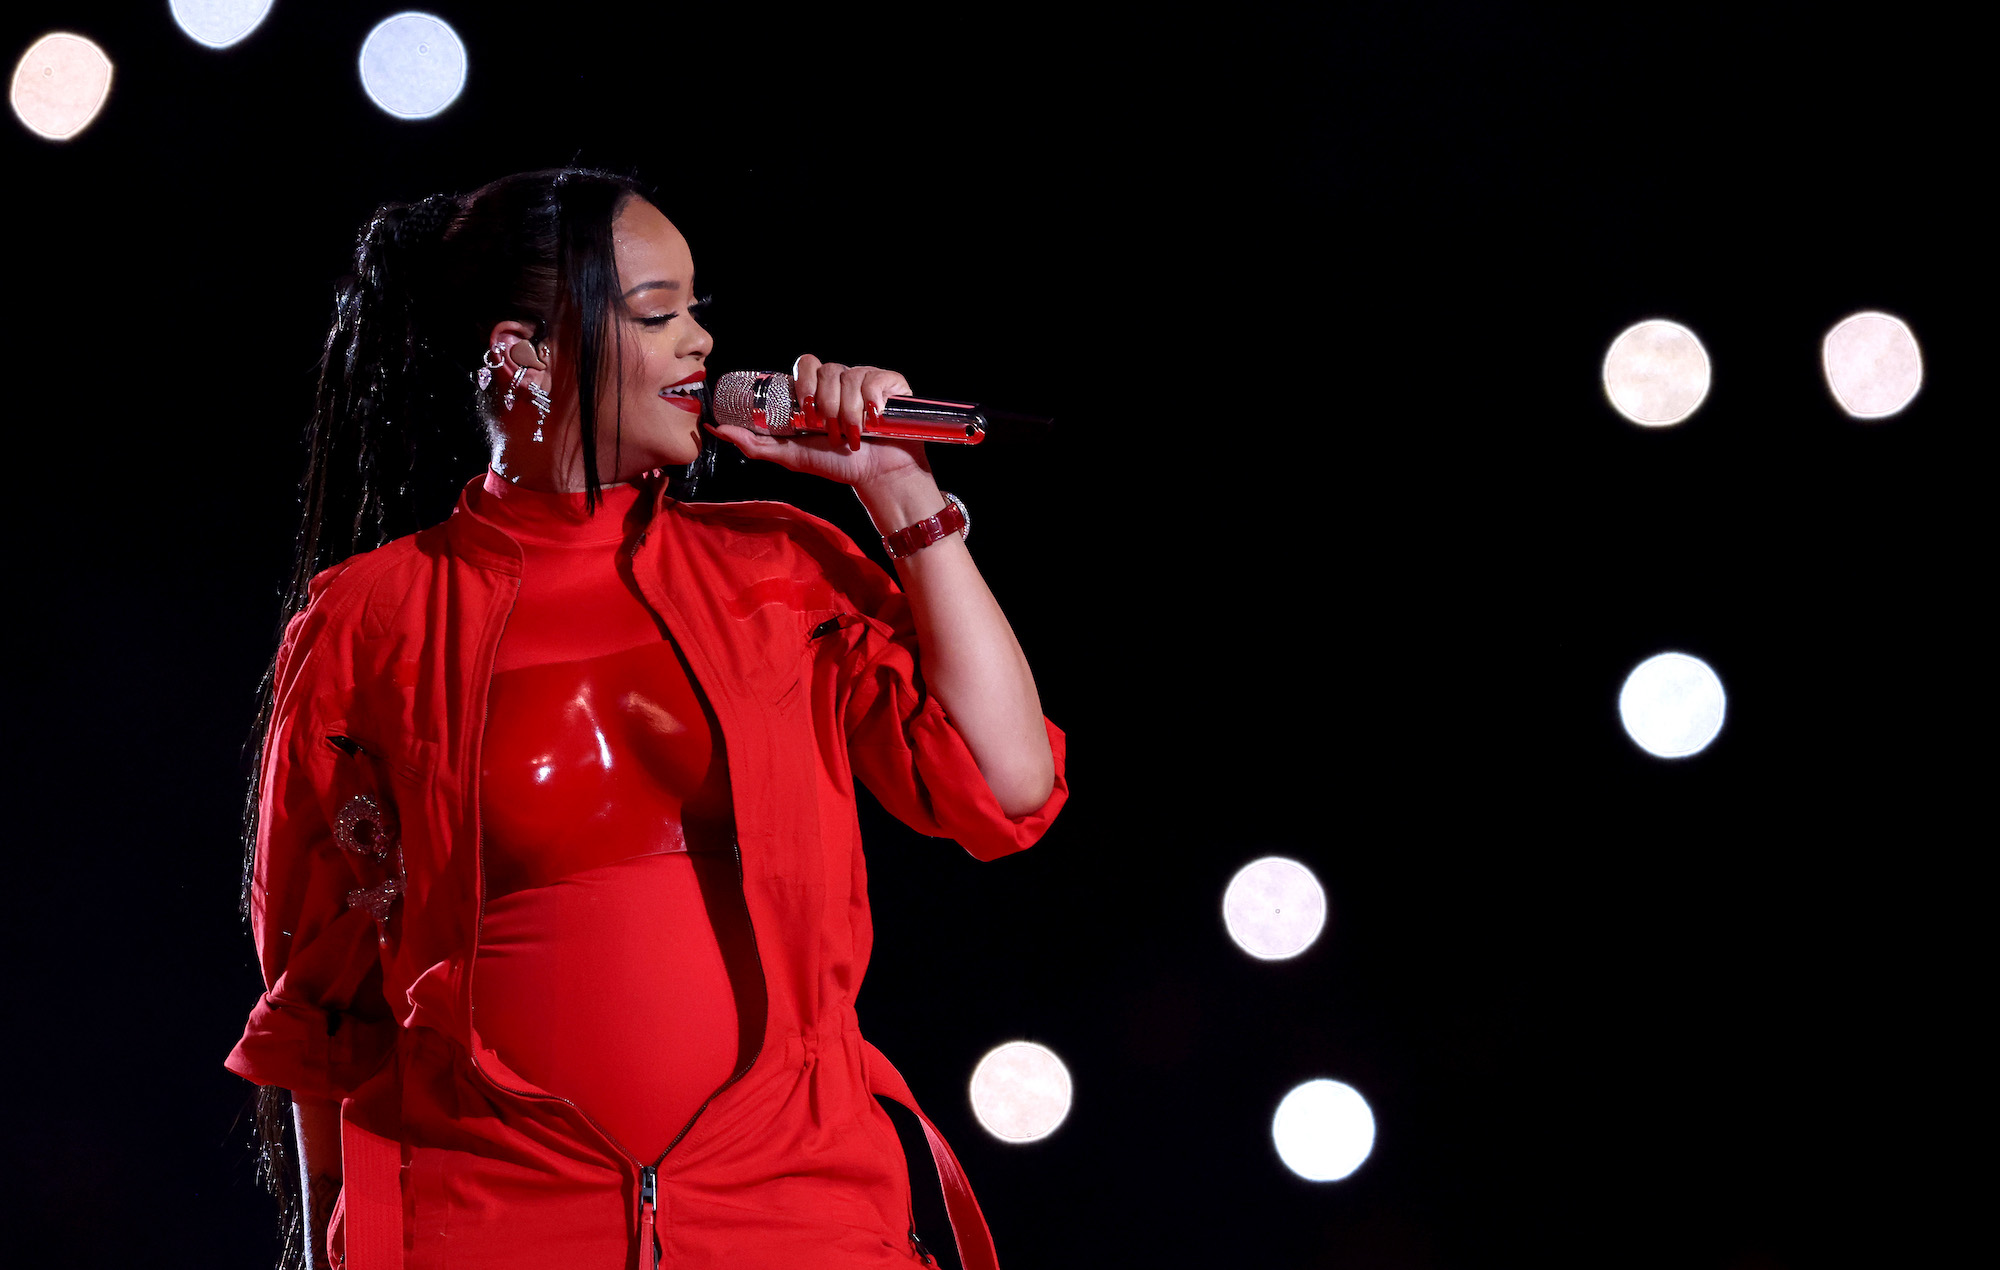 Rihanna performs live at the 2023 Super Bowl halftime show